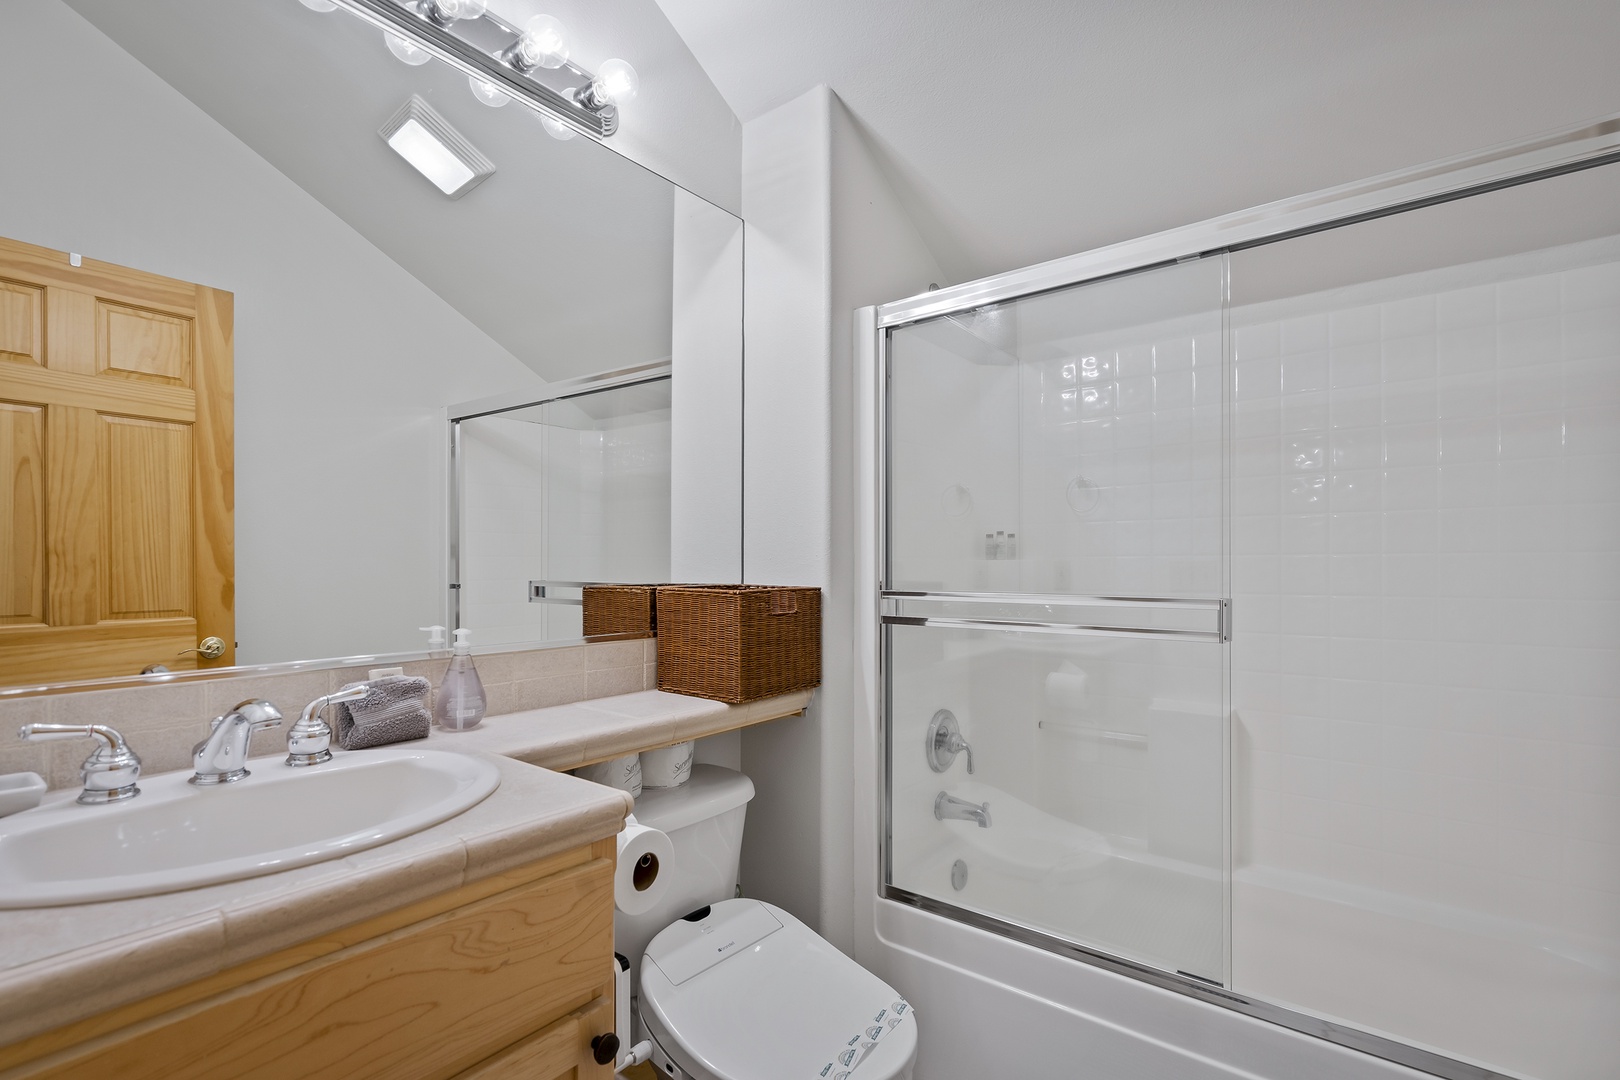 Upstairs shared bathroom: Tahoe Donner Forest Hideaway